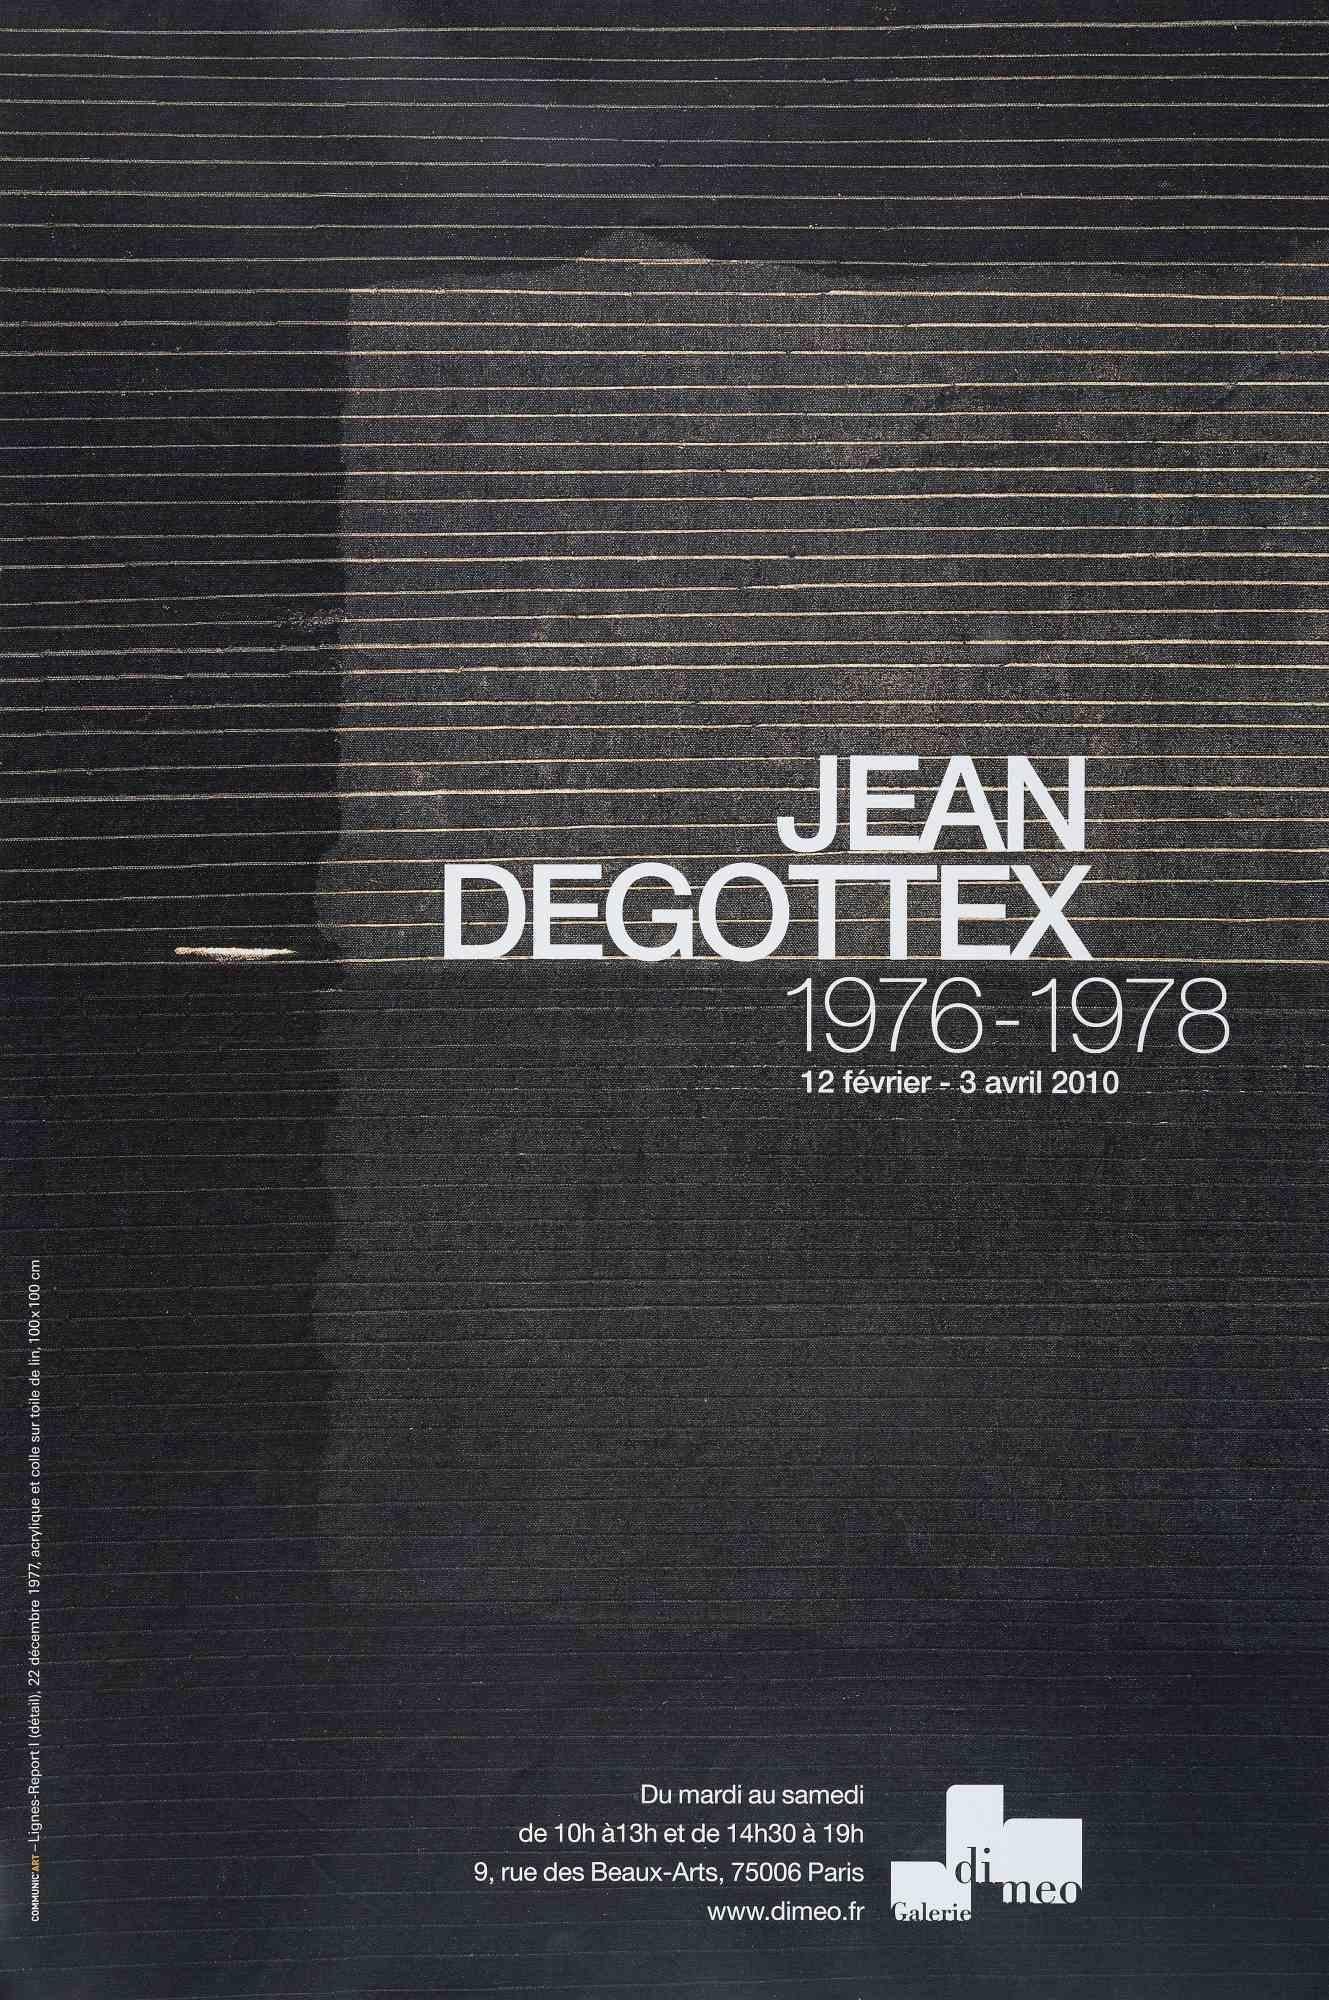 Jean Degottex, Vintage Poster Exhibition is offset print realized in the occasion of the exhibition held in Di Meo Gallery in 2010.

Good conditions.